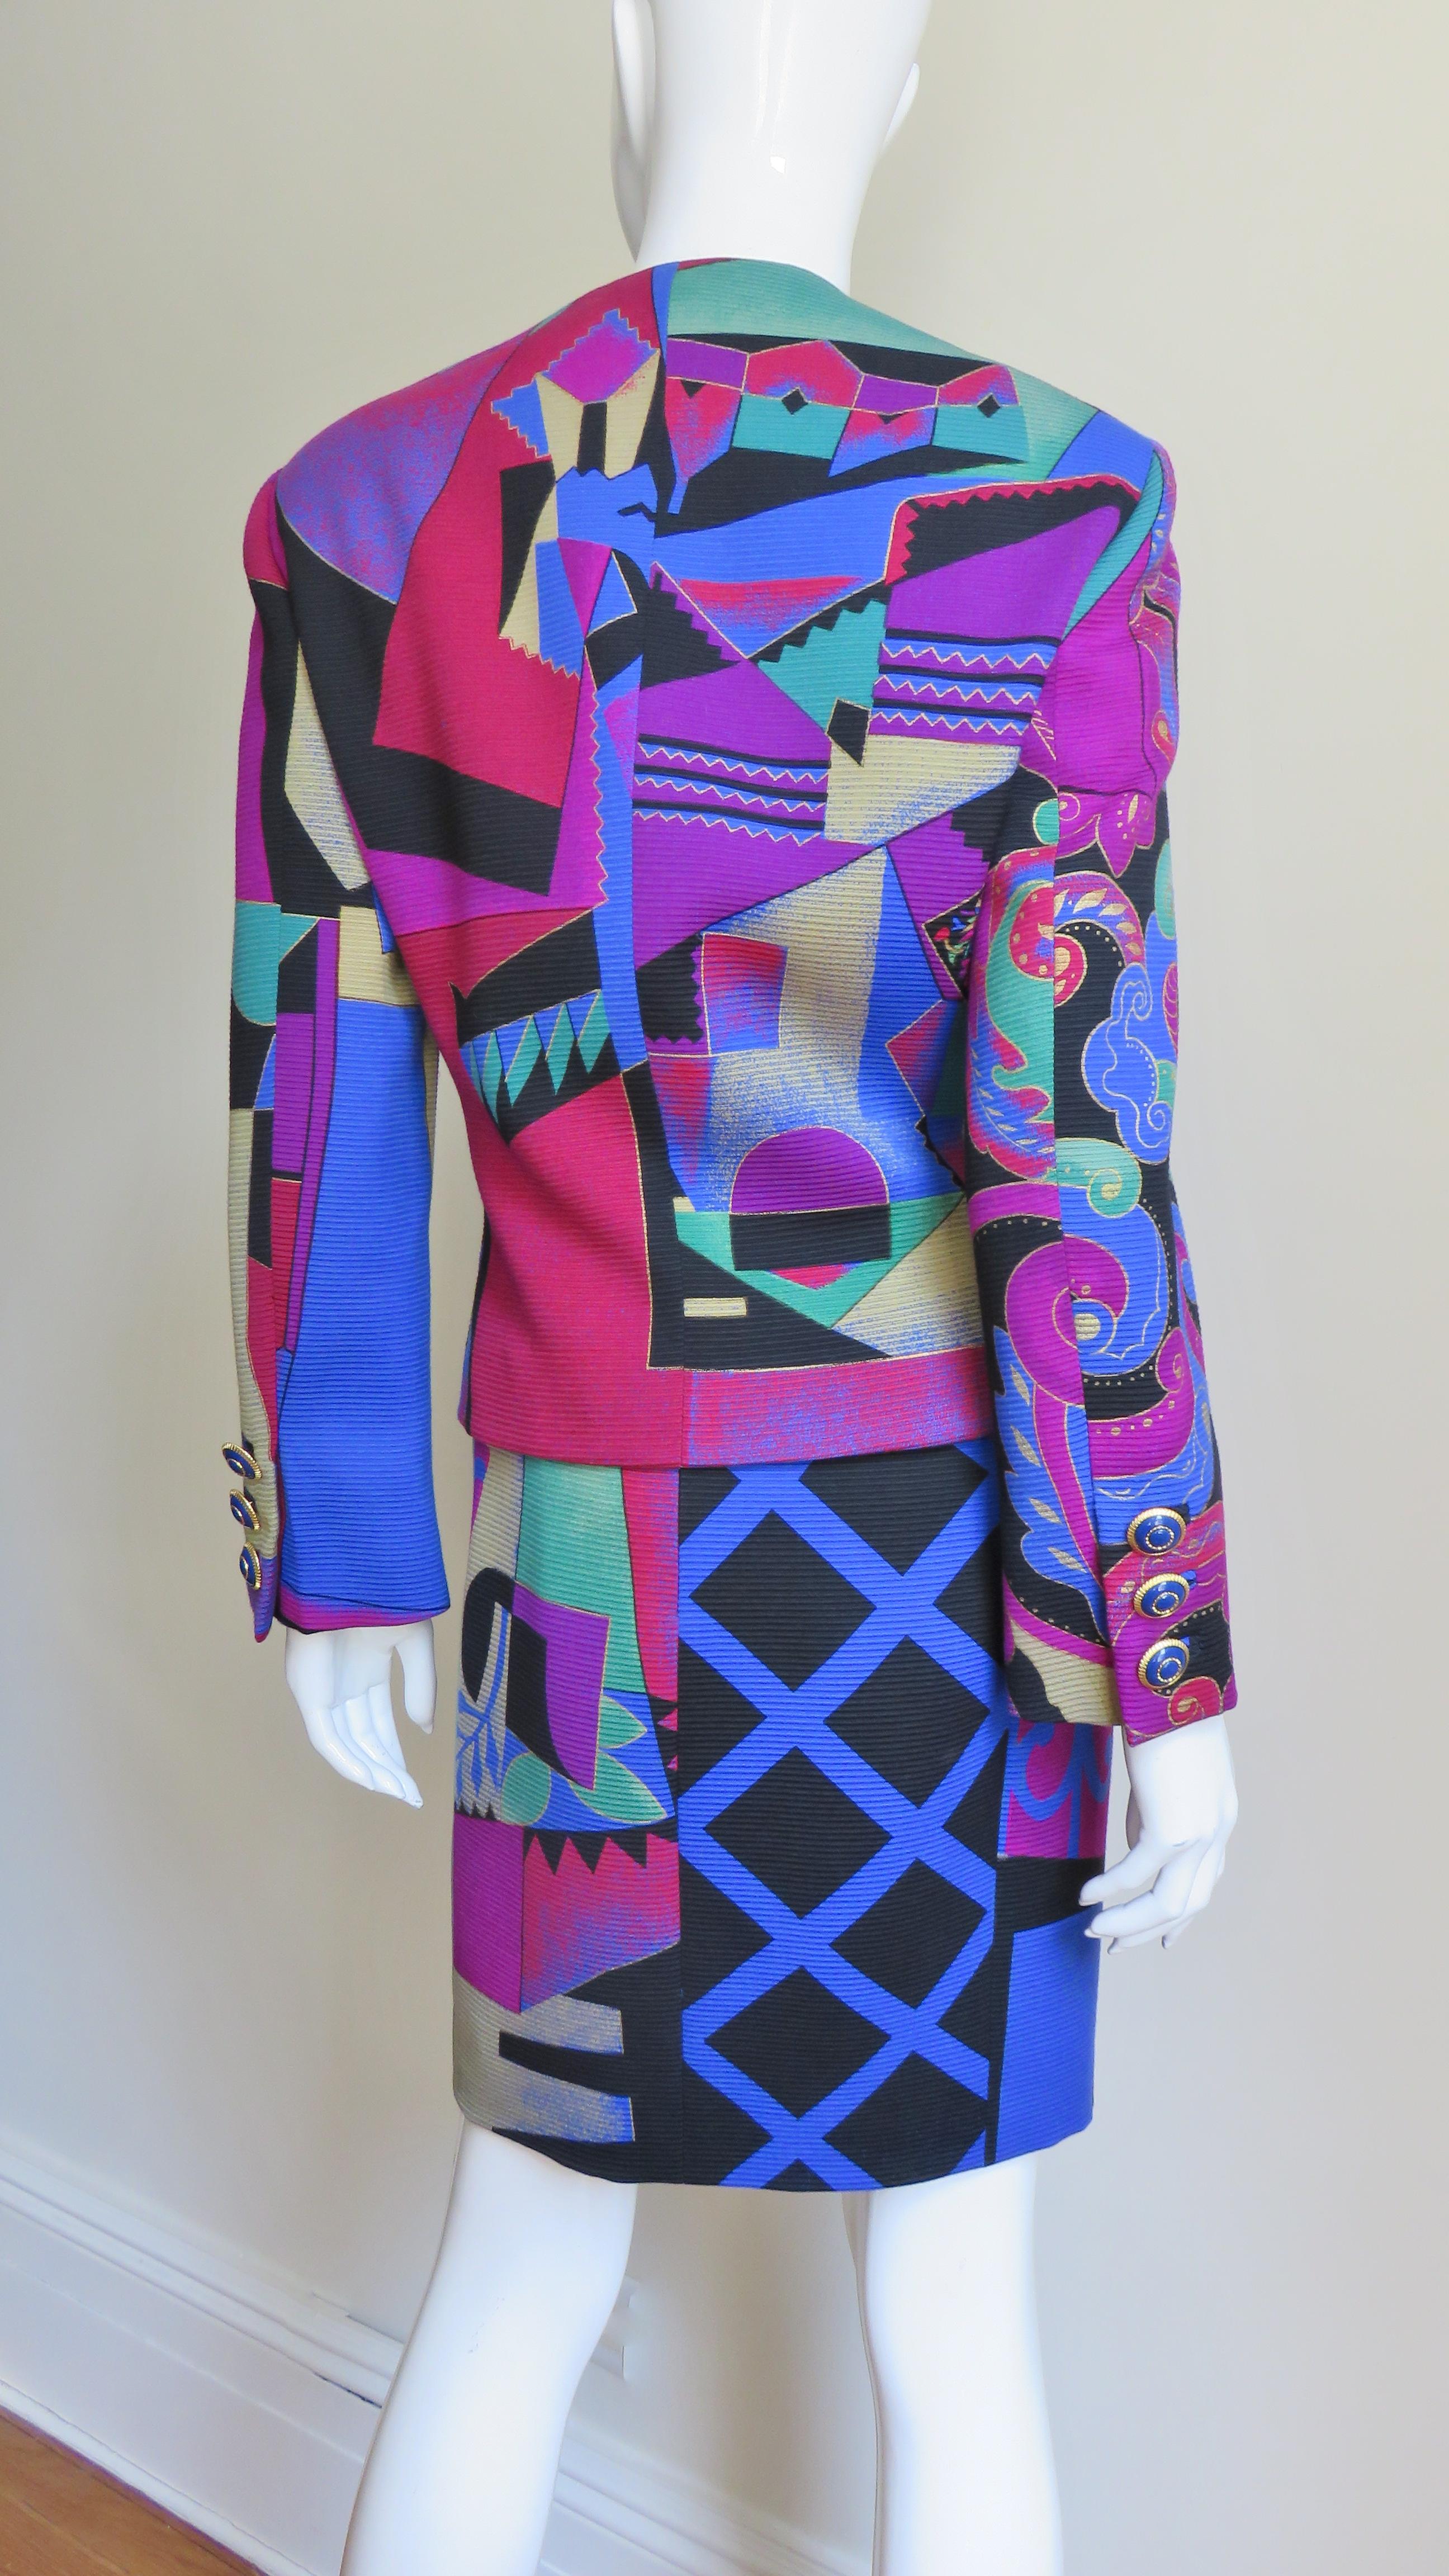 Gianni Versace Graffiti Dress and Jacket A/W 1991 For Sale 5